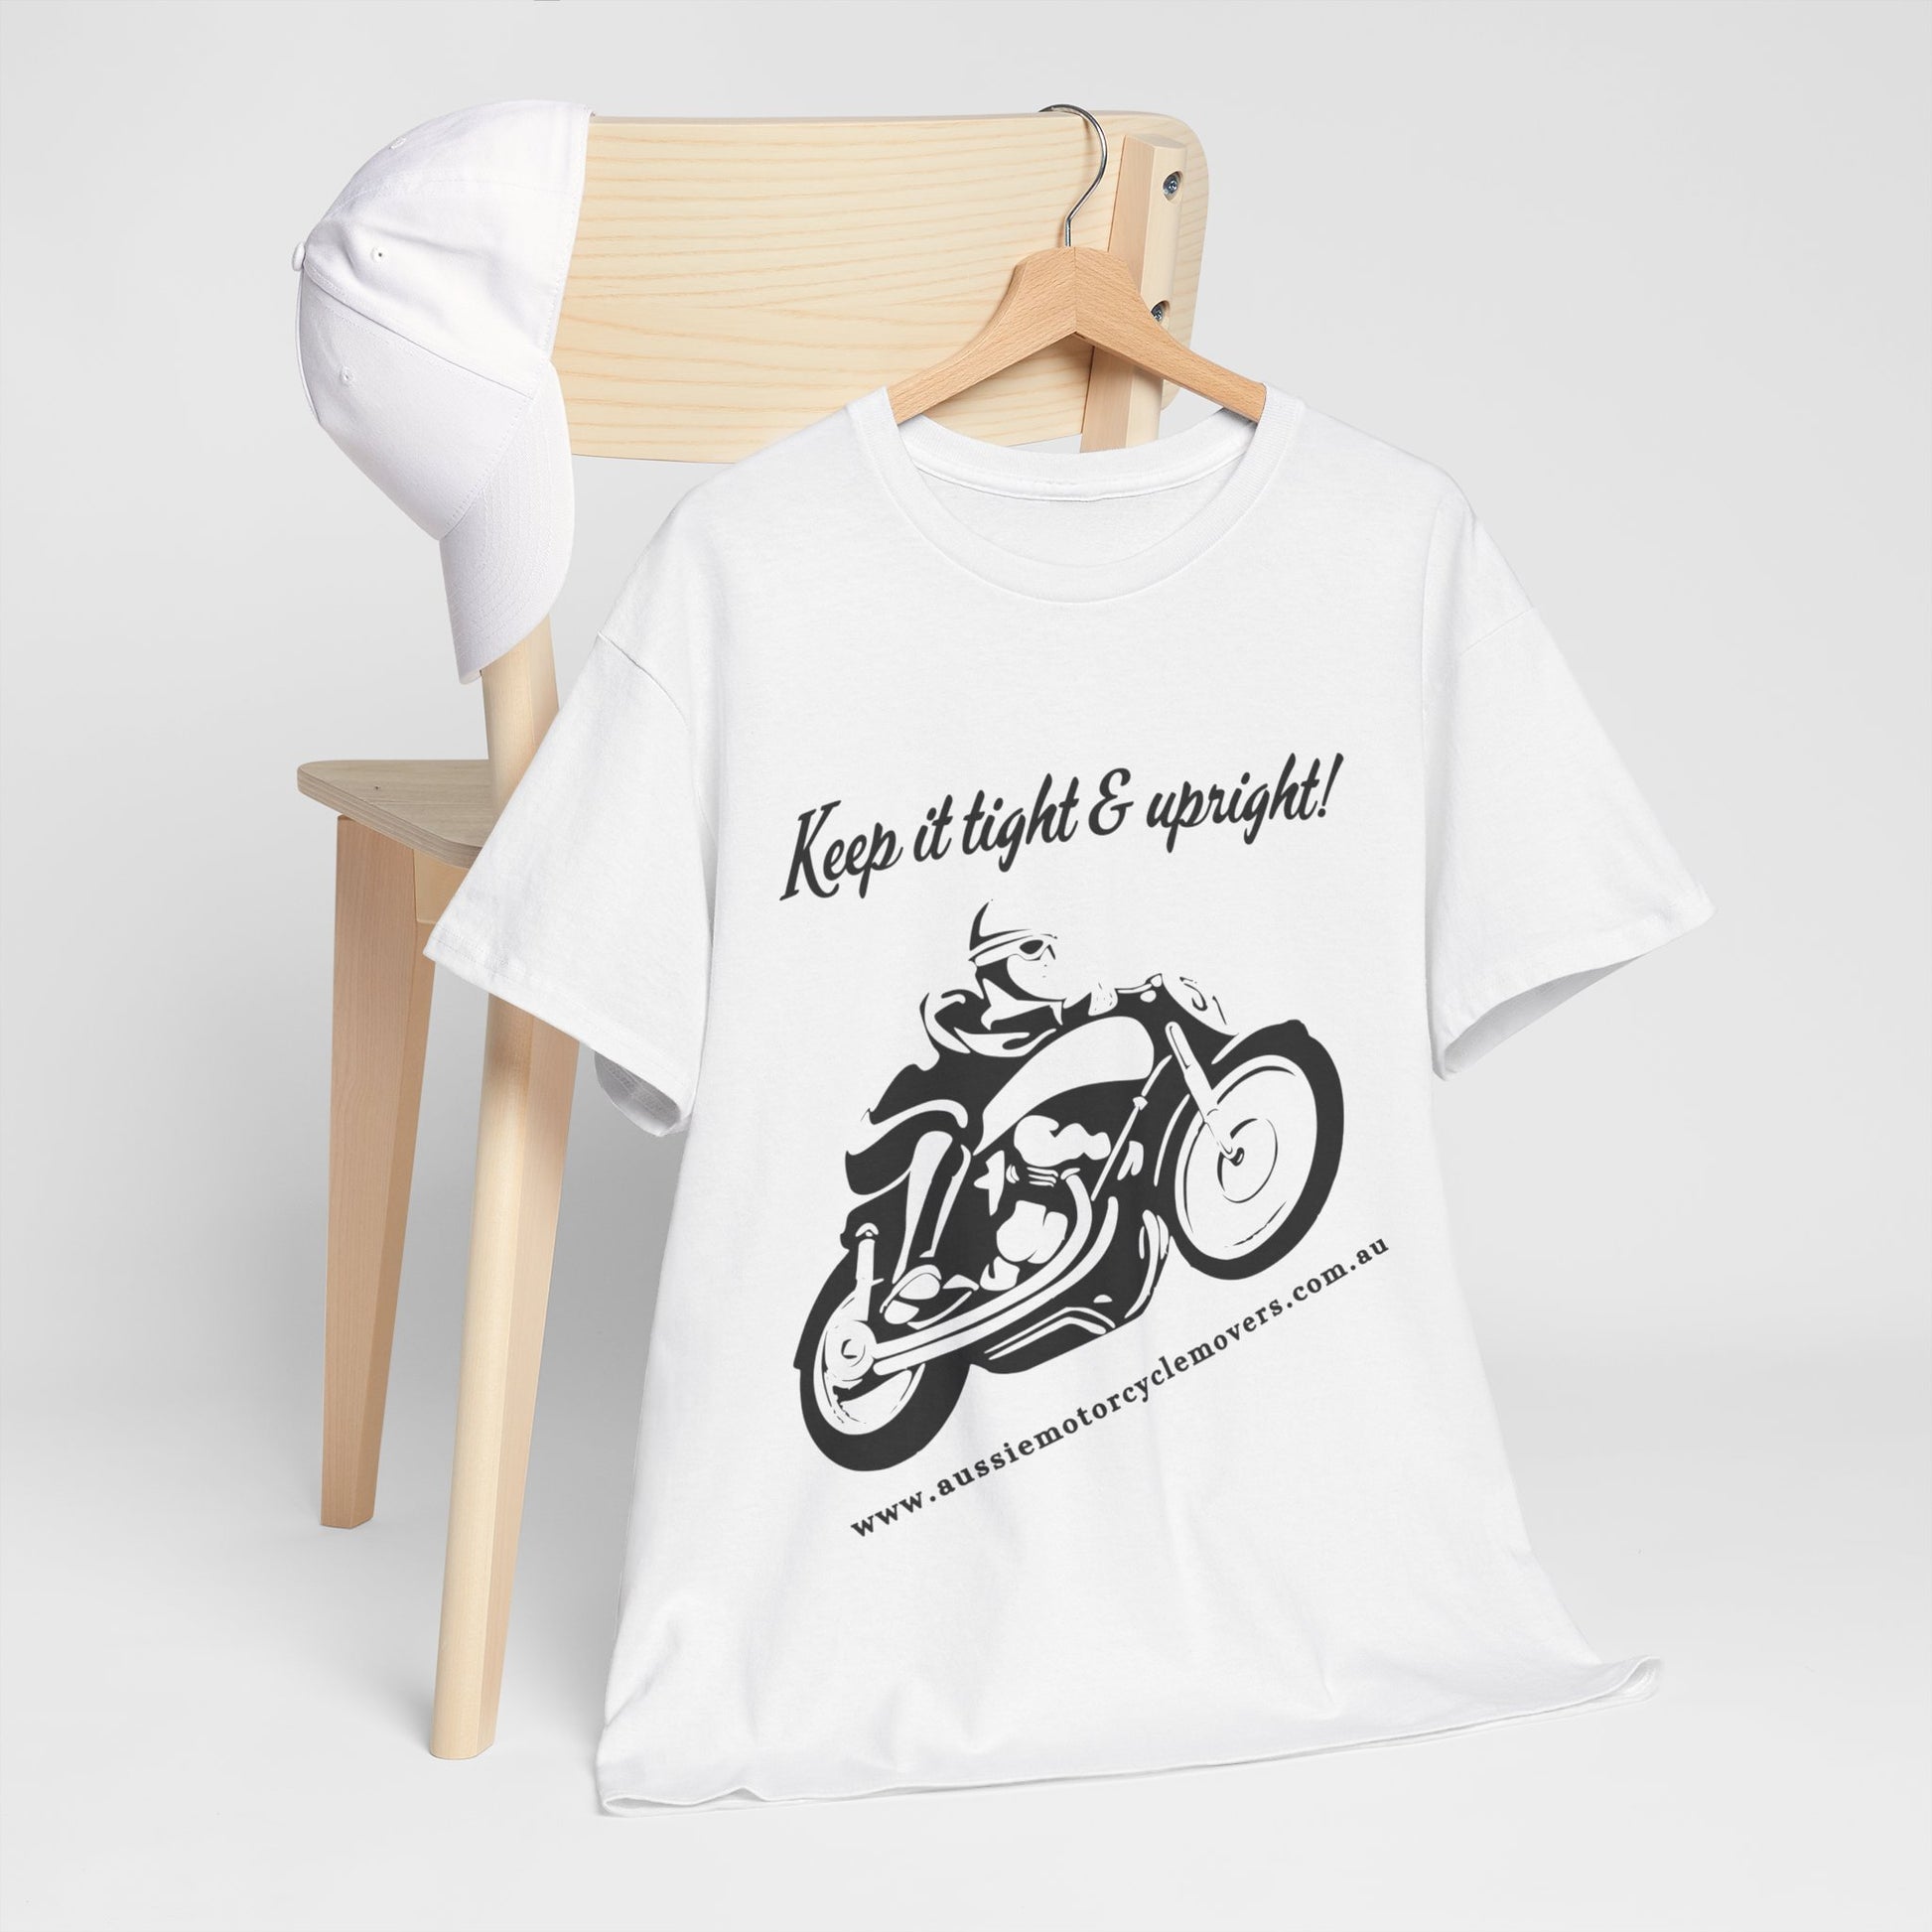 Aussie Motorcycle Movers Supporter T-Shirt | "Keep it Tight and Upright!" Mick Train Legendary Saying Tee T-Shirt White S 